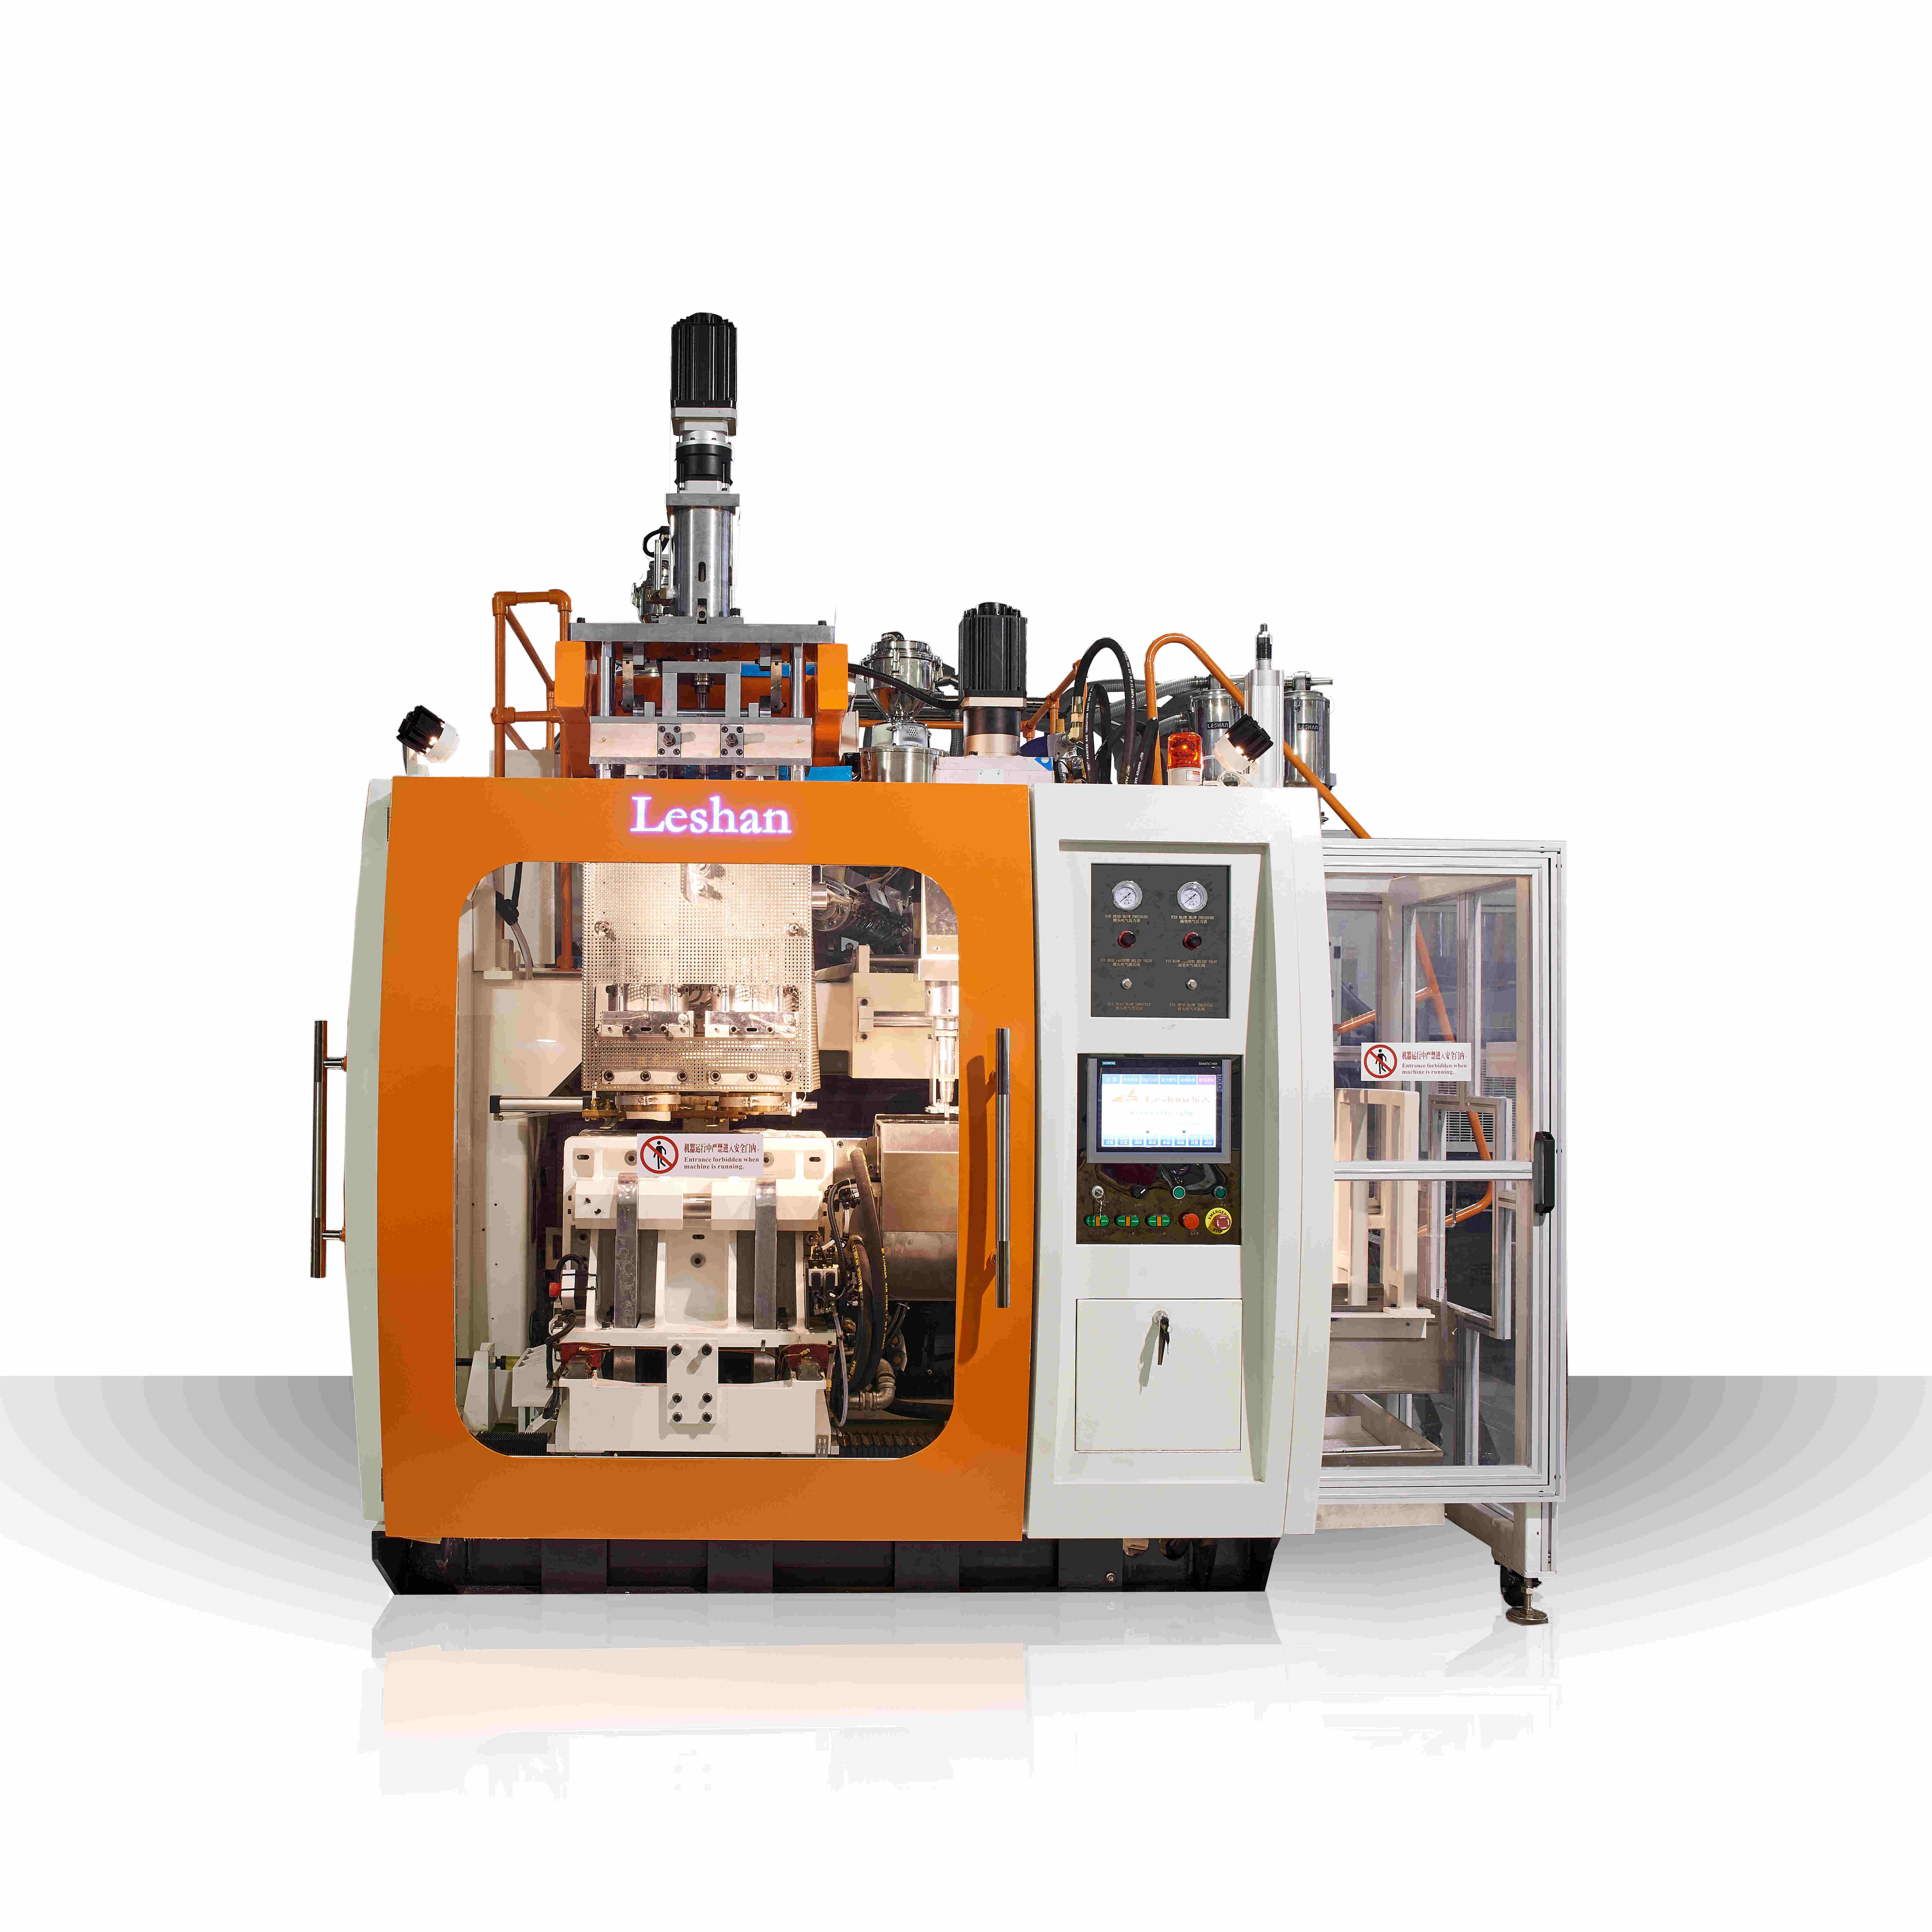 How to improve the production capacity and speed of 2-stage blow molding machines?